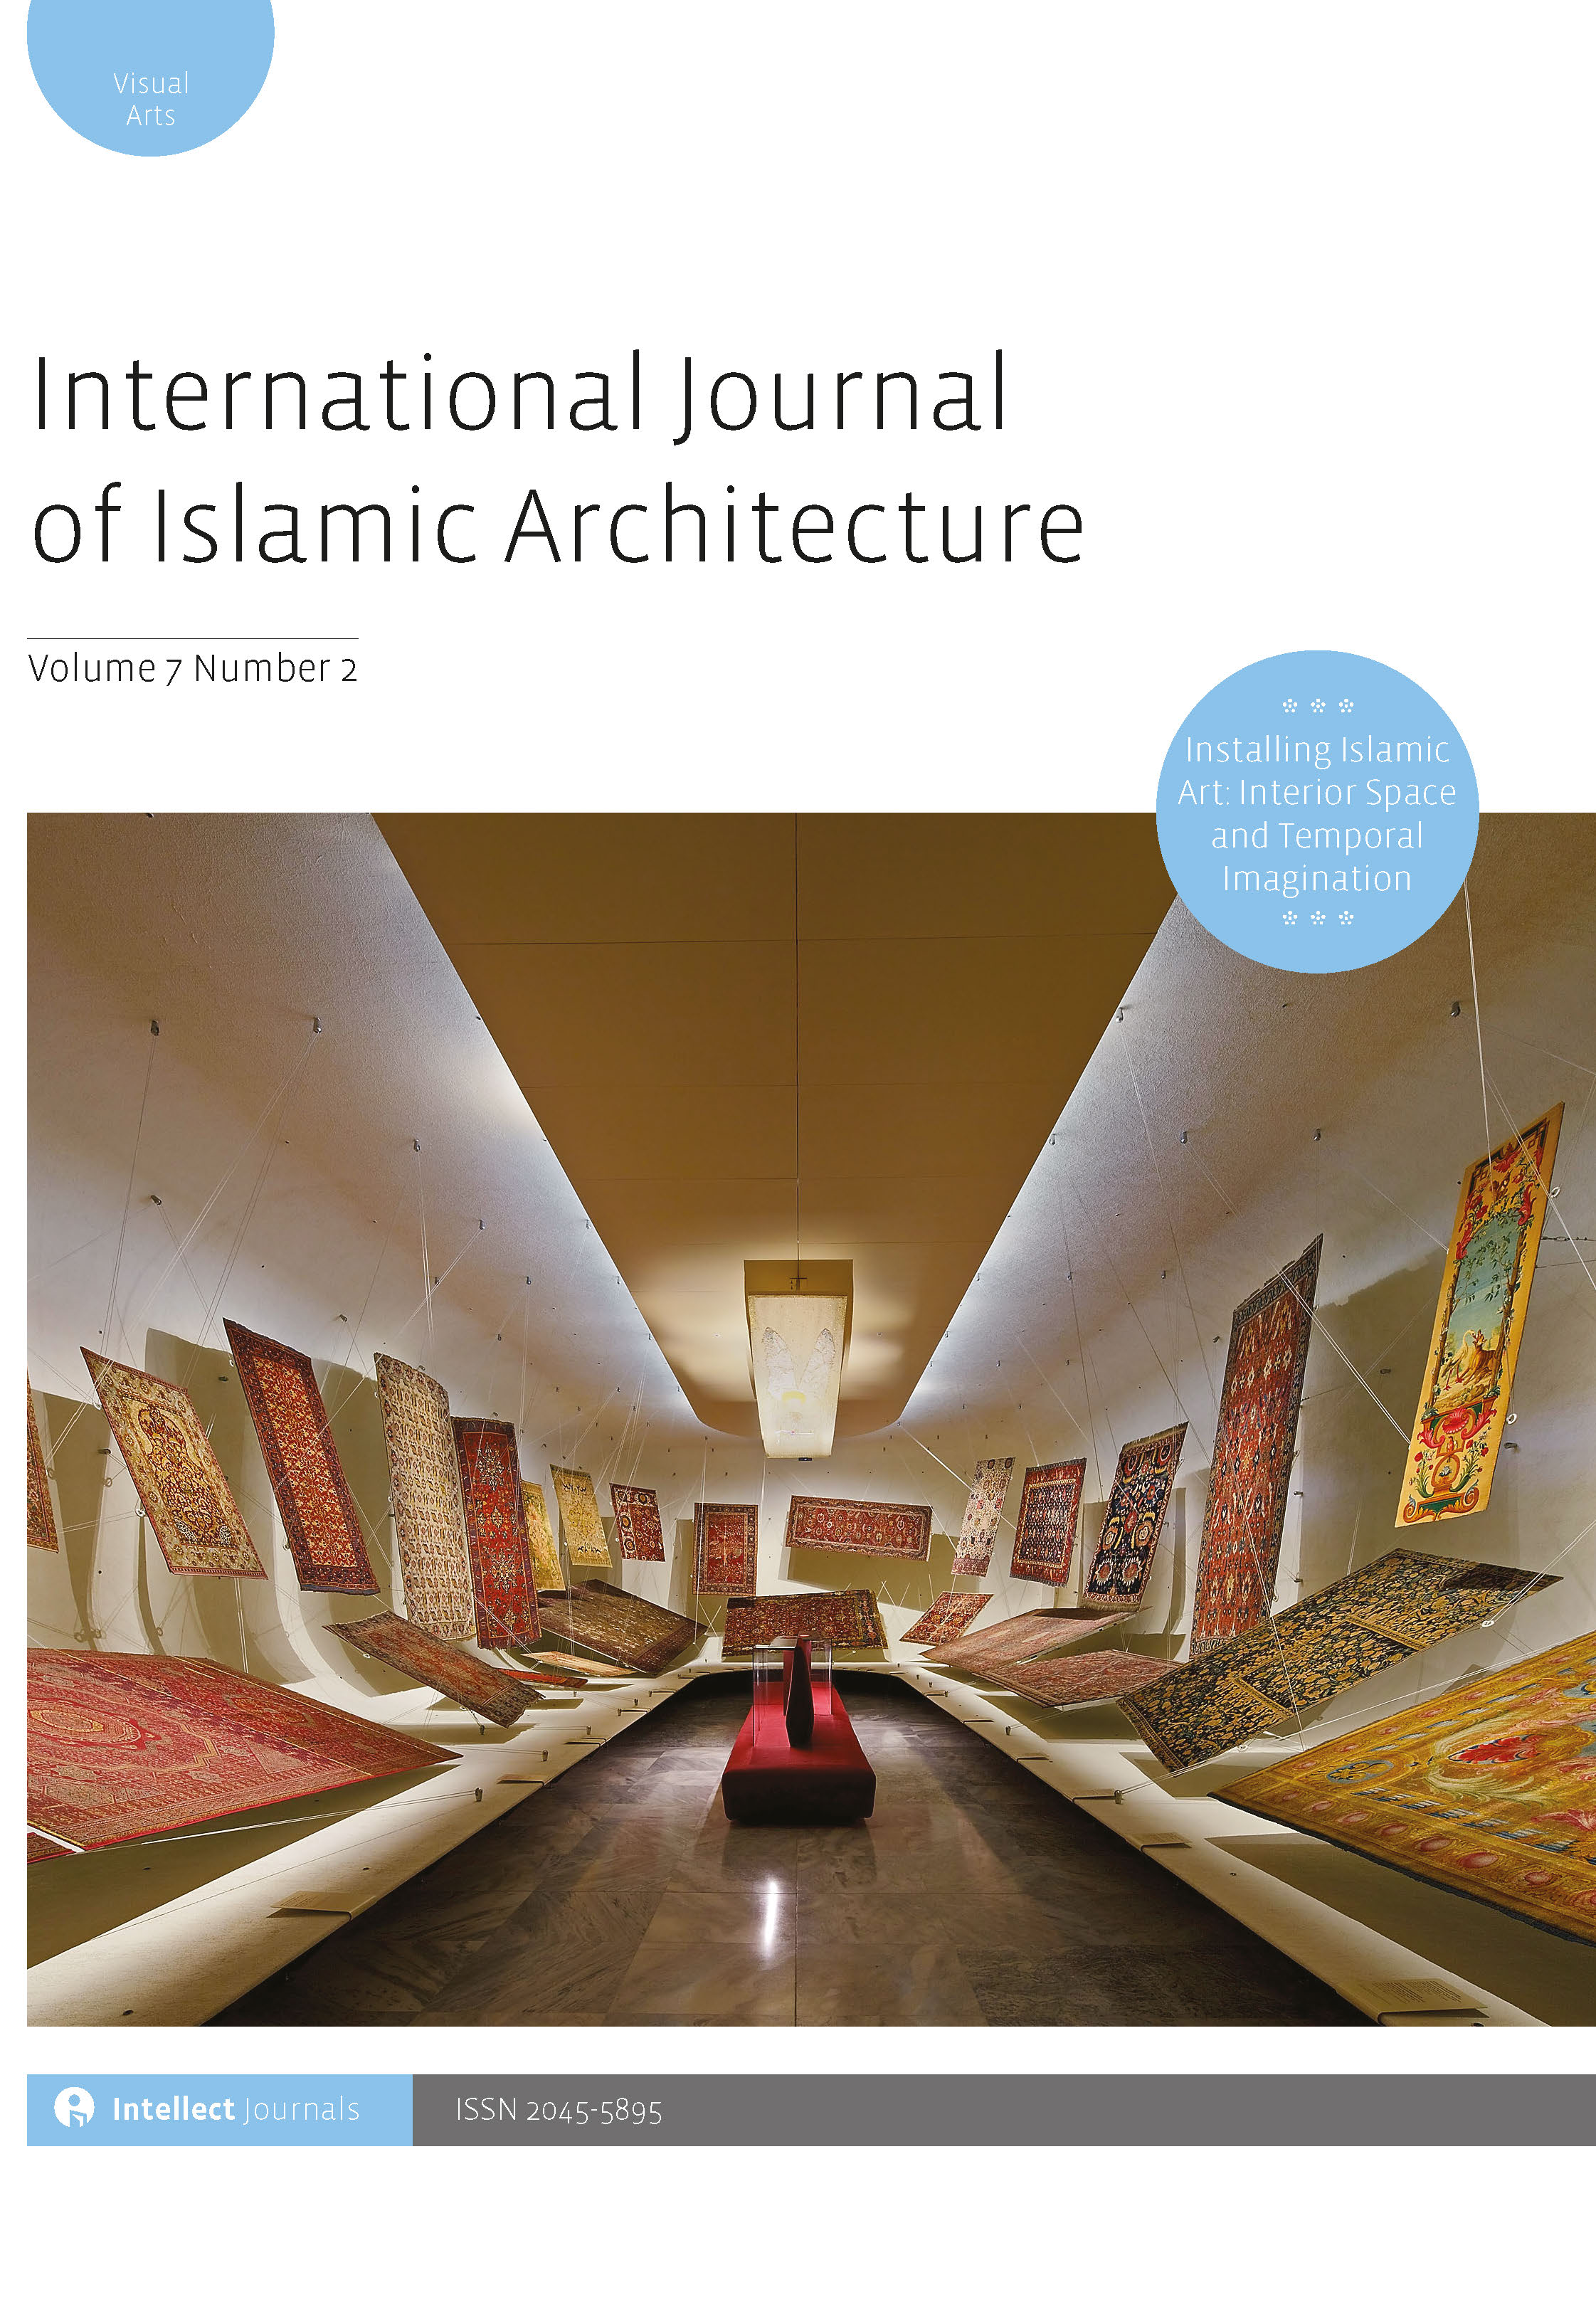 Re-Contextualizing the Object: Using New Technologies to Reconstruct the Lost Interiors of Medieval Islamic Buildings